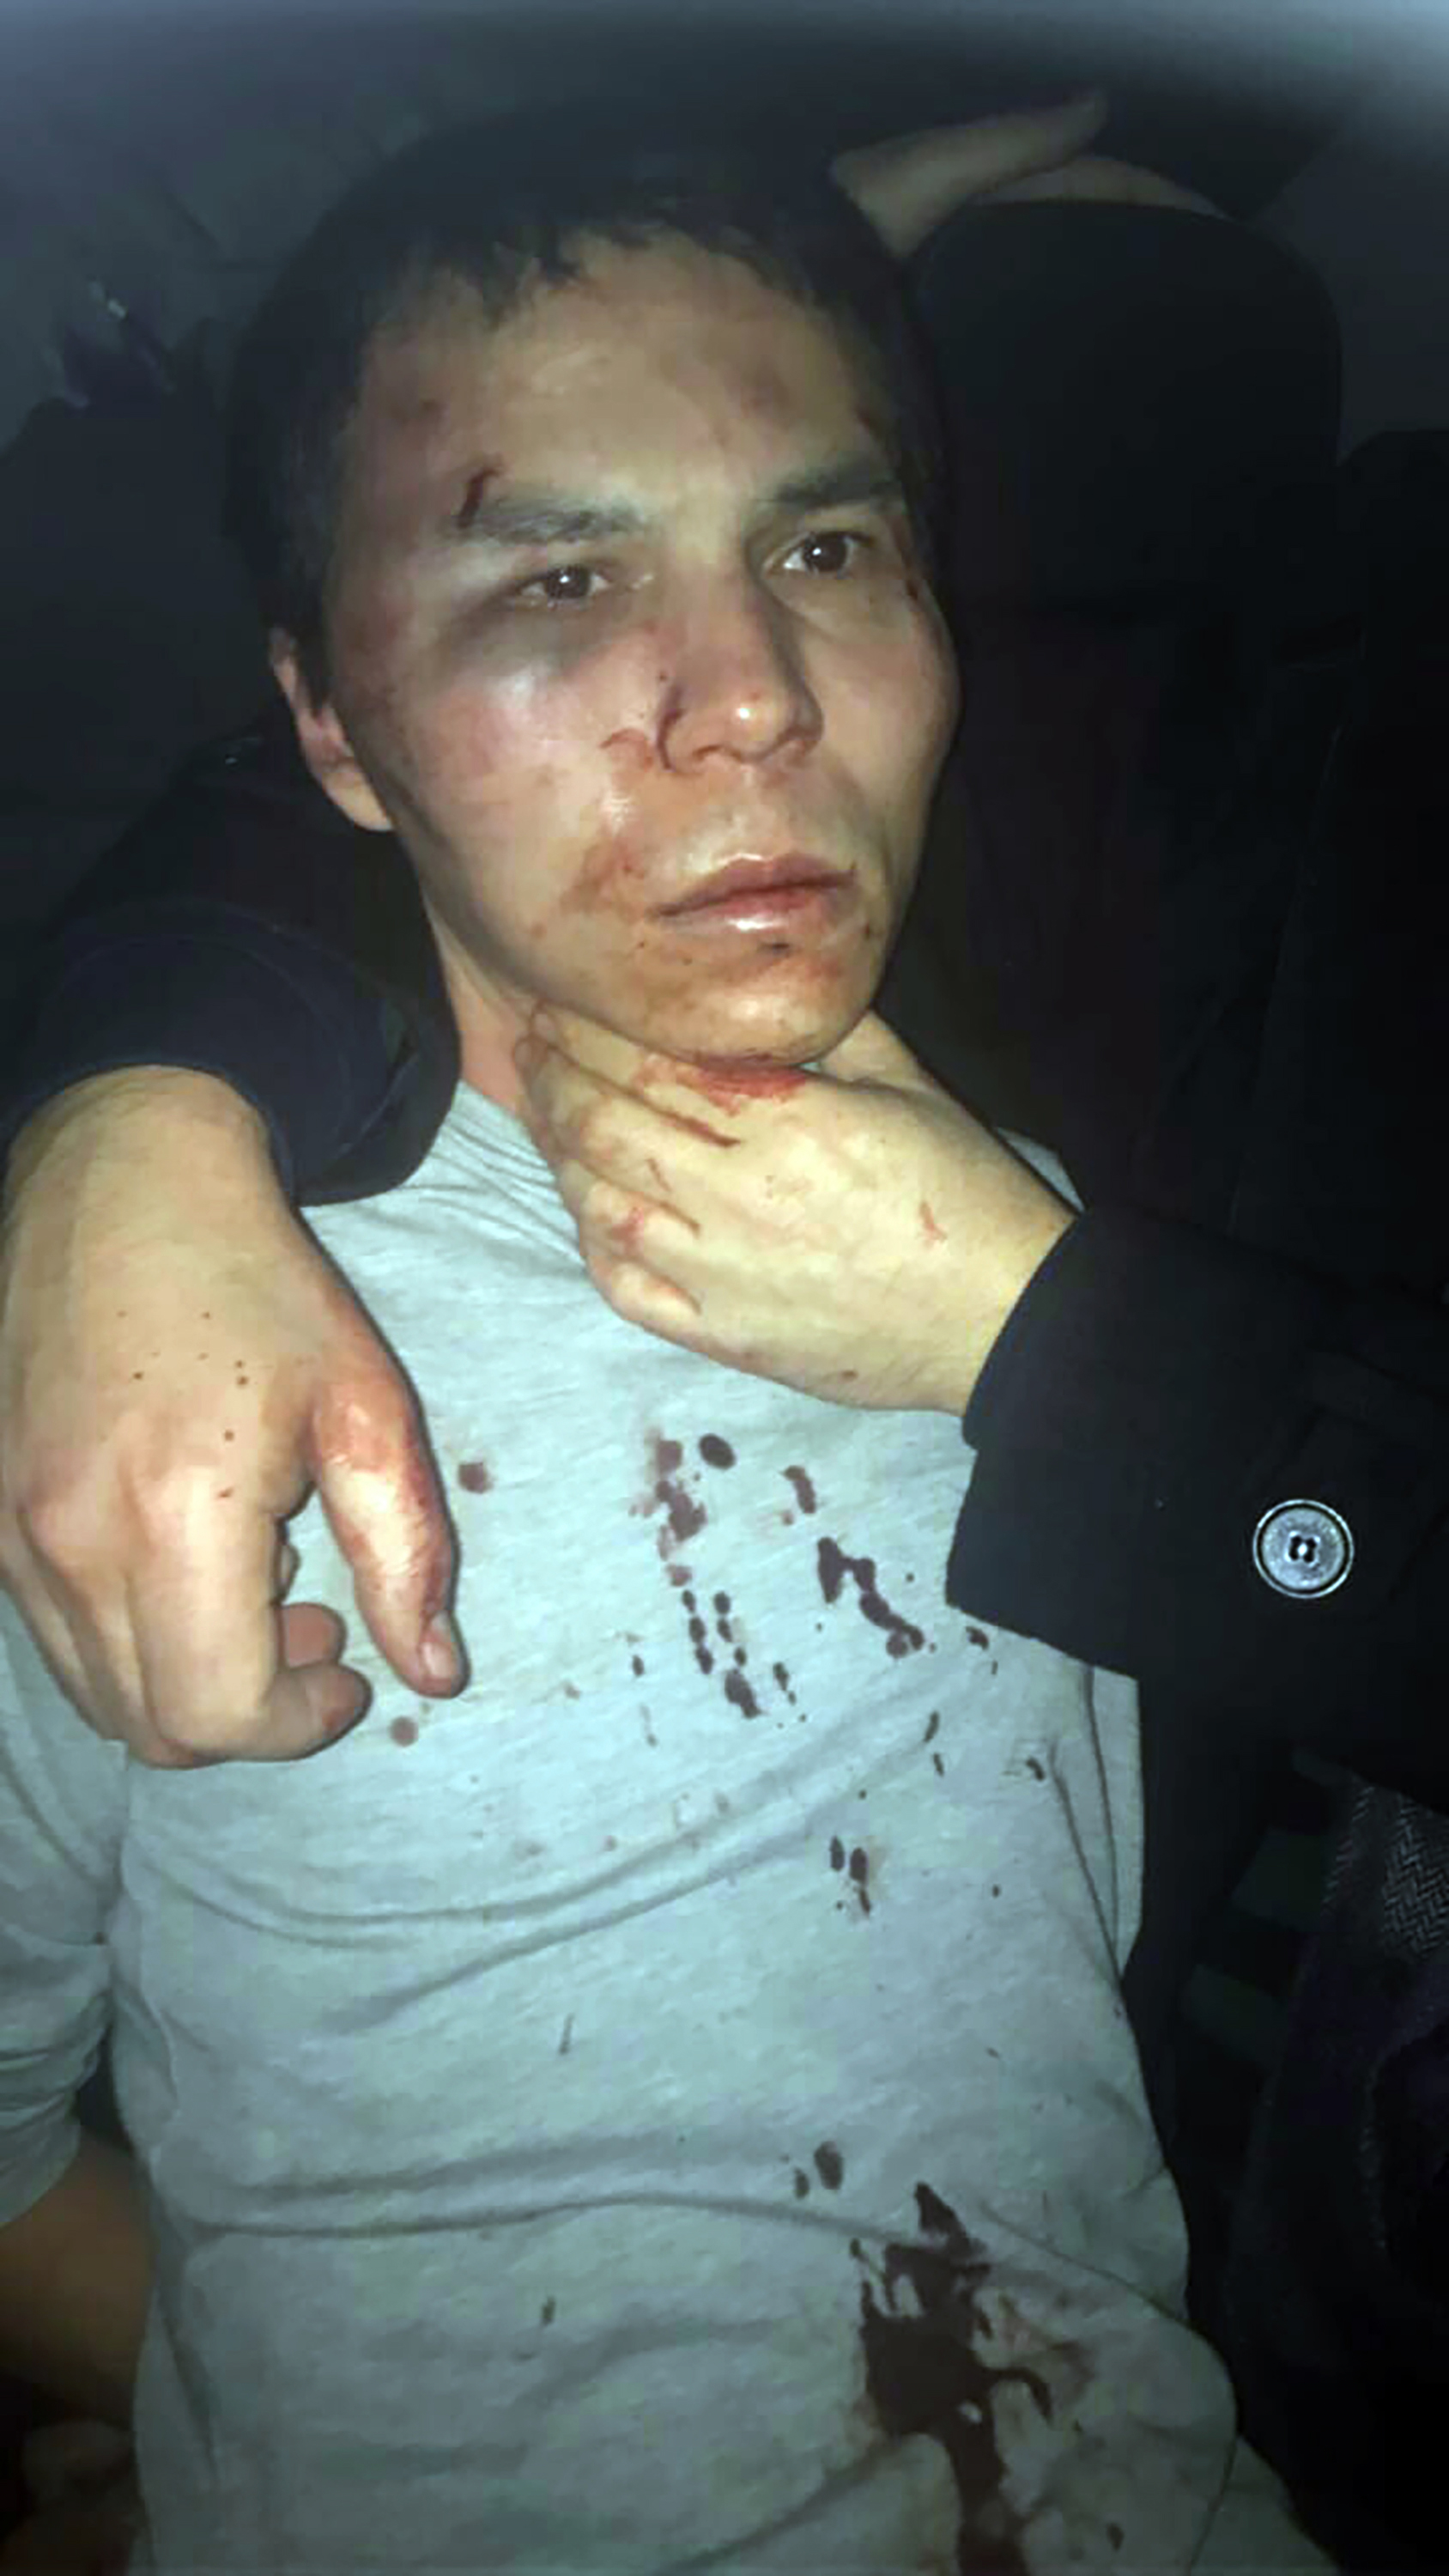 This handout picture released by the Turkish police and taken from Dogan News Agency on January 16, 2017 shows the main suspect in the Reina nightclub rampage captured by Turkish police after a gunman killed 39 people, including many foreigners, in an attack at an upmarket nightclub in Istanbul where revellers were celebrating the New Year.  Turkish police late on January 16, 2017 caught the attacker who shot dead 39 people on New Year's night at an Istanbul nightclub, state-run TRT television reported. The alleged attacker was found along with his four-year-old son in an apartment in the Esenyurt district of Istanbul after a massive police operation, TRT reported.  / AFP PHOTO / DOGAN NEWS AGENCY / Handout /  - Turkey OUT / RESTRICTED TO EDITORIAL USE - MANDATORY CREDIT "AFP PHOTO / DOGAN NEWS AGENCY / TURKISH POLICE" - NO MARKETING NO ADVERTISING CAMPAIGNS - DISTRIBUTED AS A SERVICE TO CLIENTS